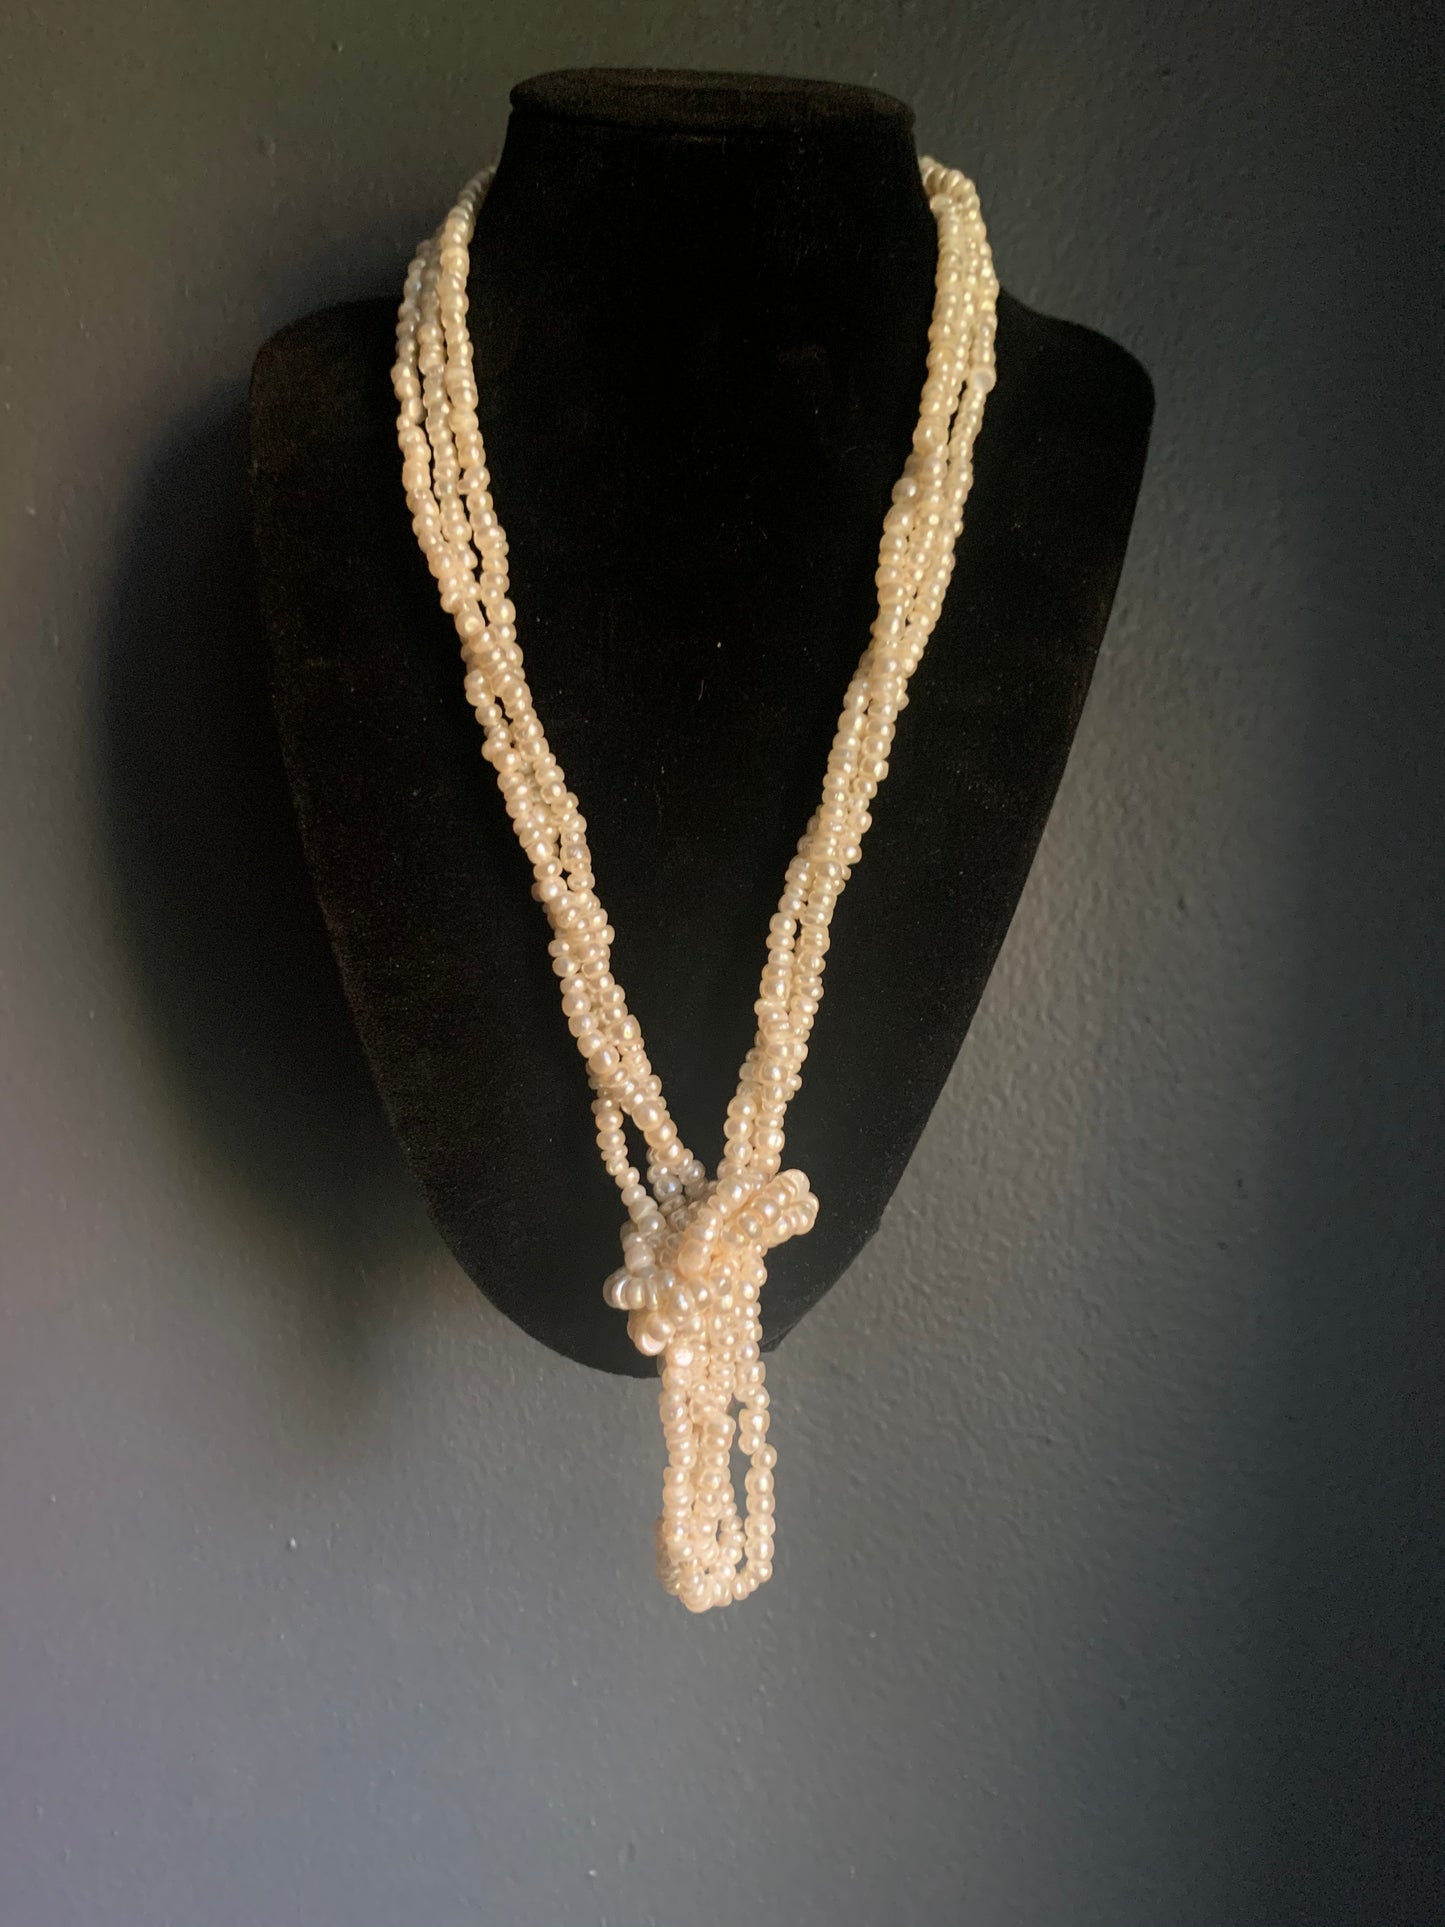 A rice pearl necklace